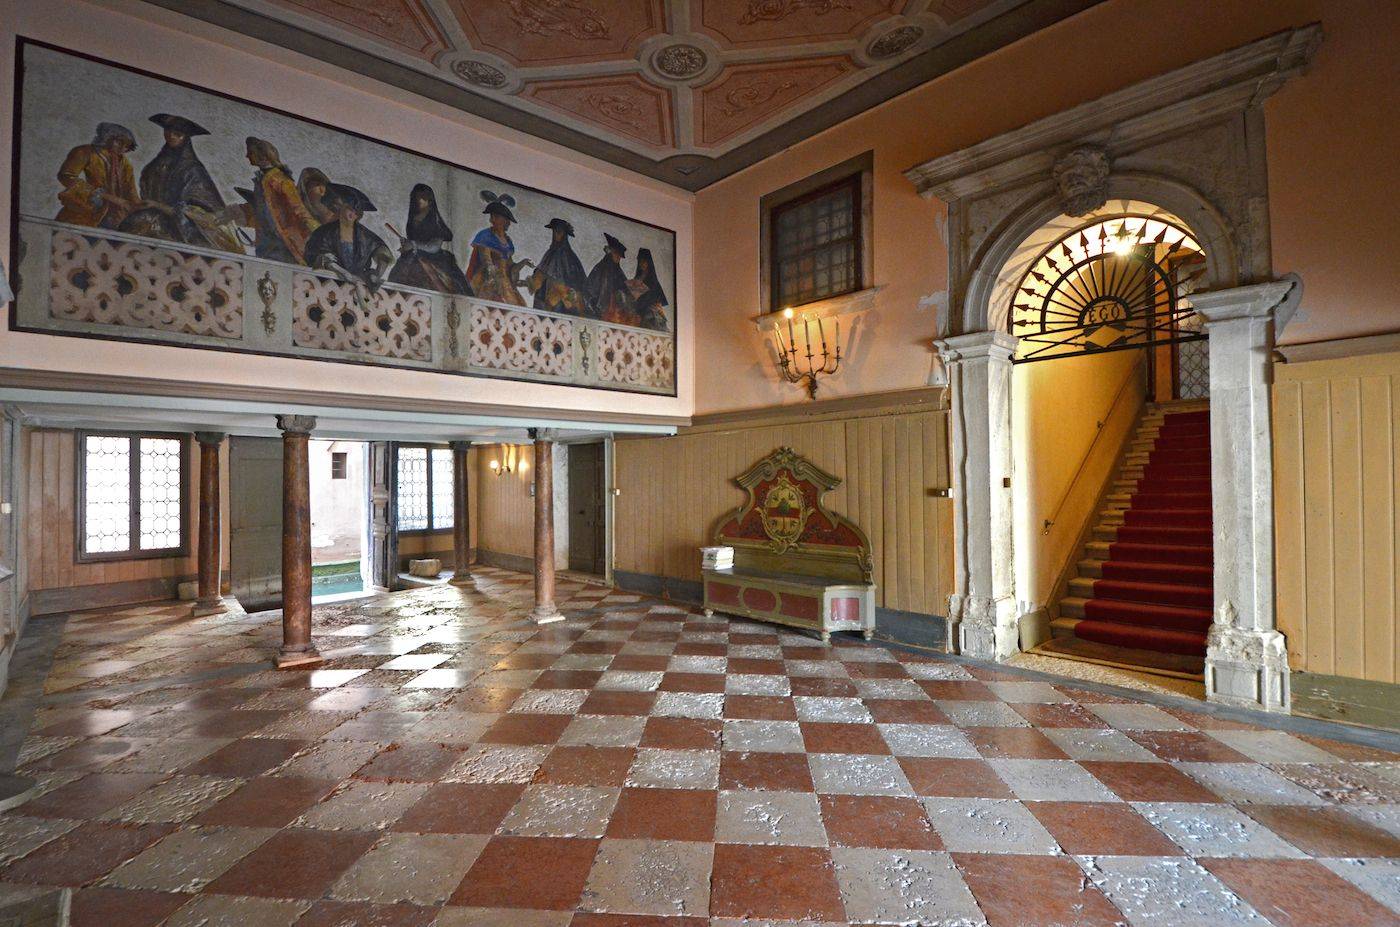 the stunning communal entrance hall at the ground floor of the Palazzo Veneziano